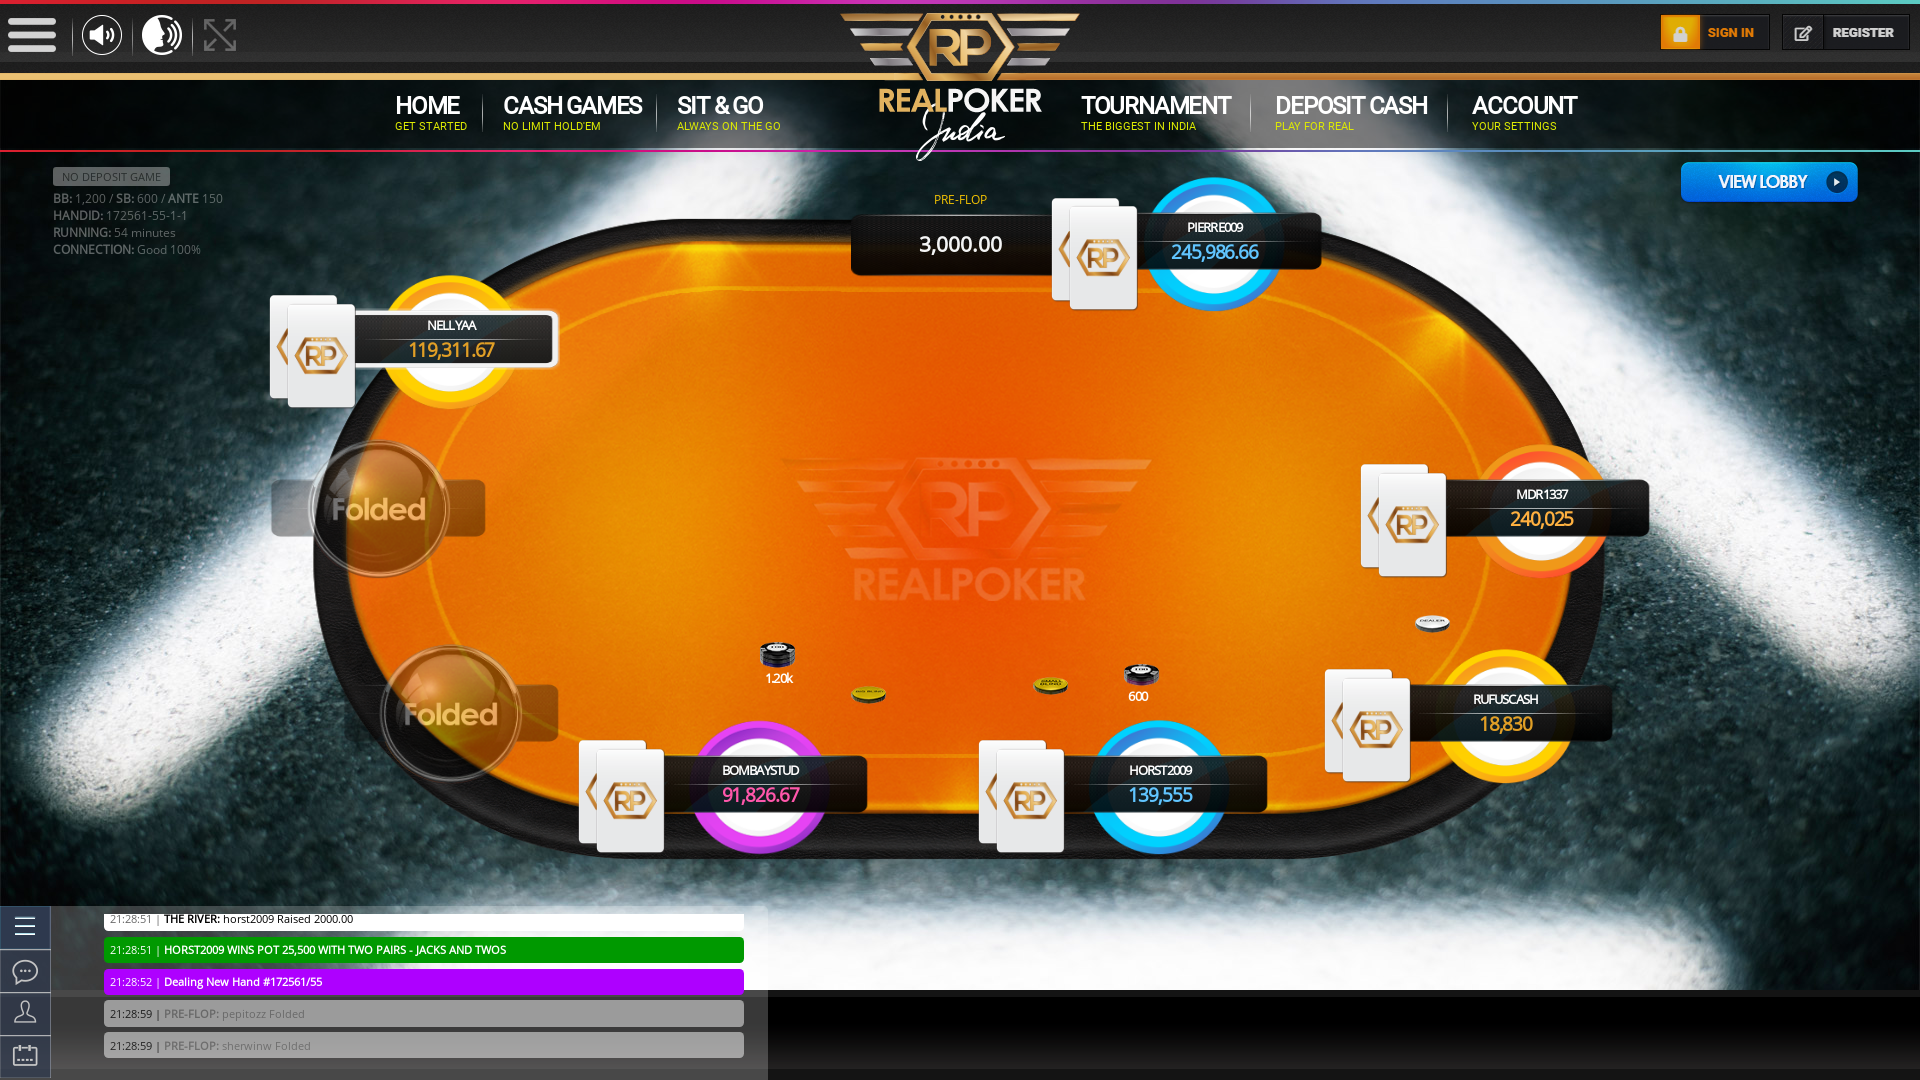 Online poker on a 10 player table in the 54th minute match up